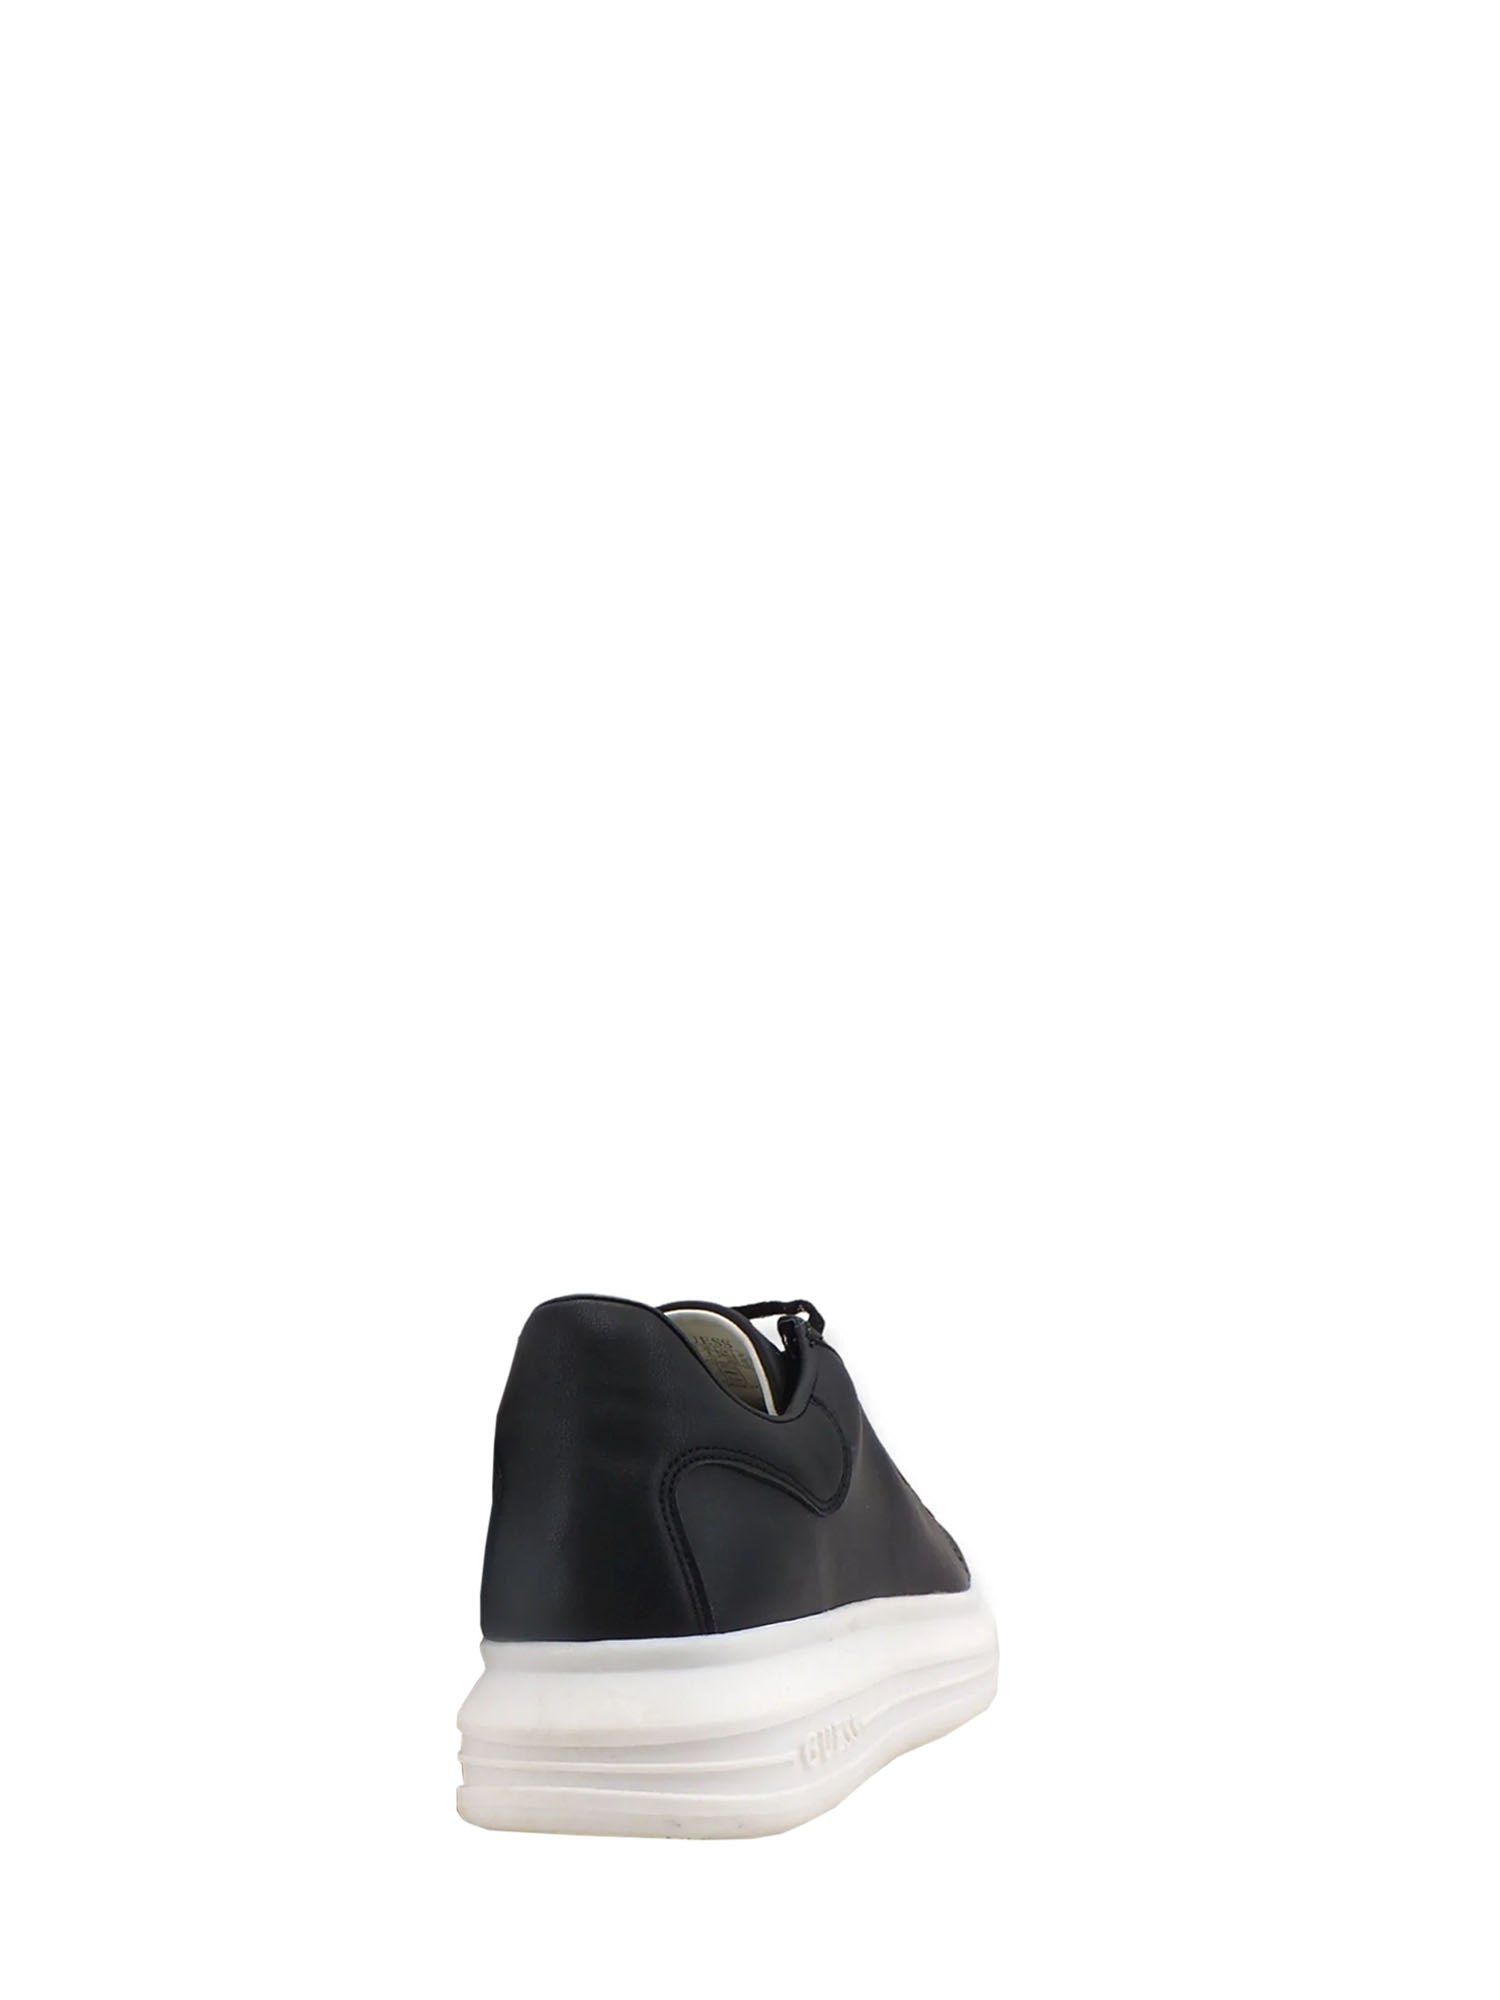 GUESS JEANS SNEAKERS SALERNO NERO - BIANCO